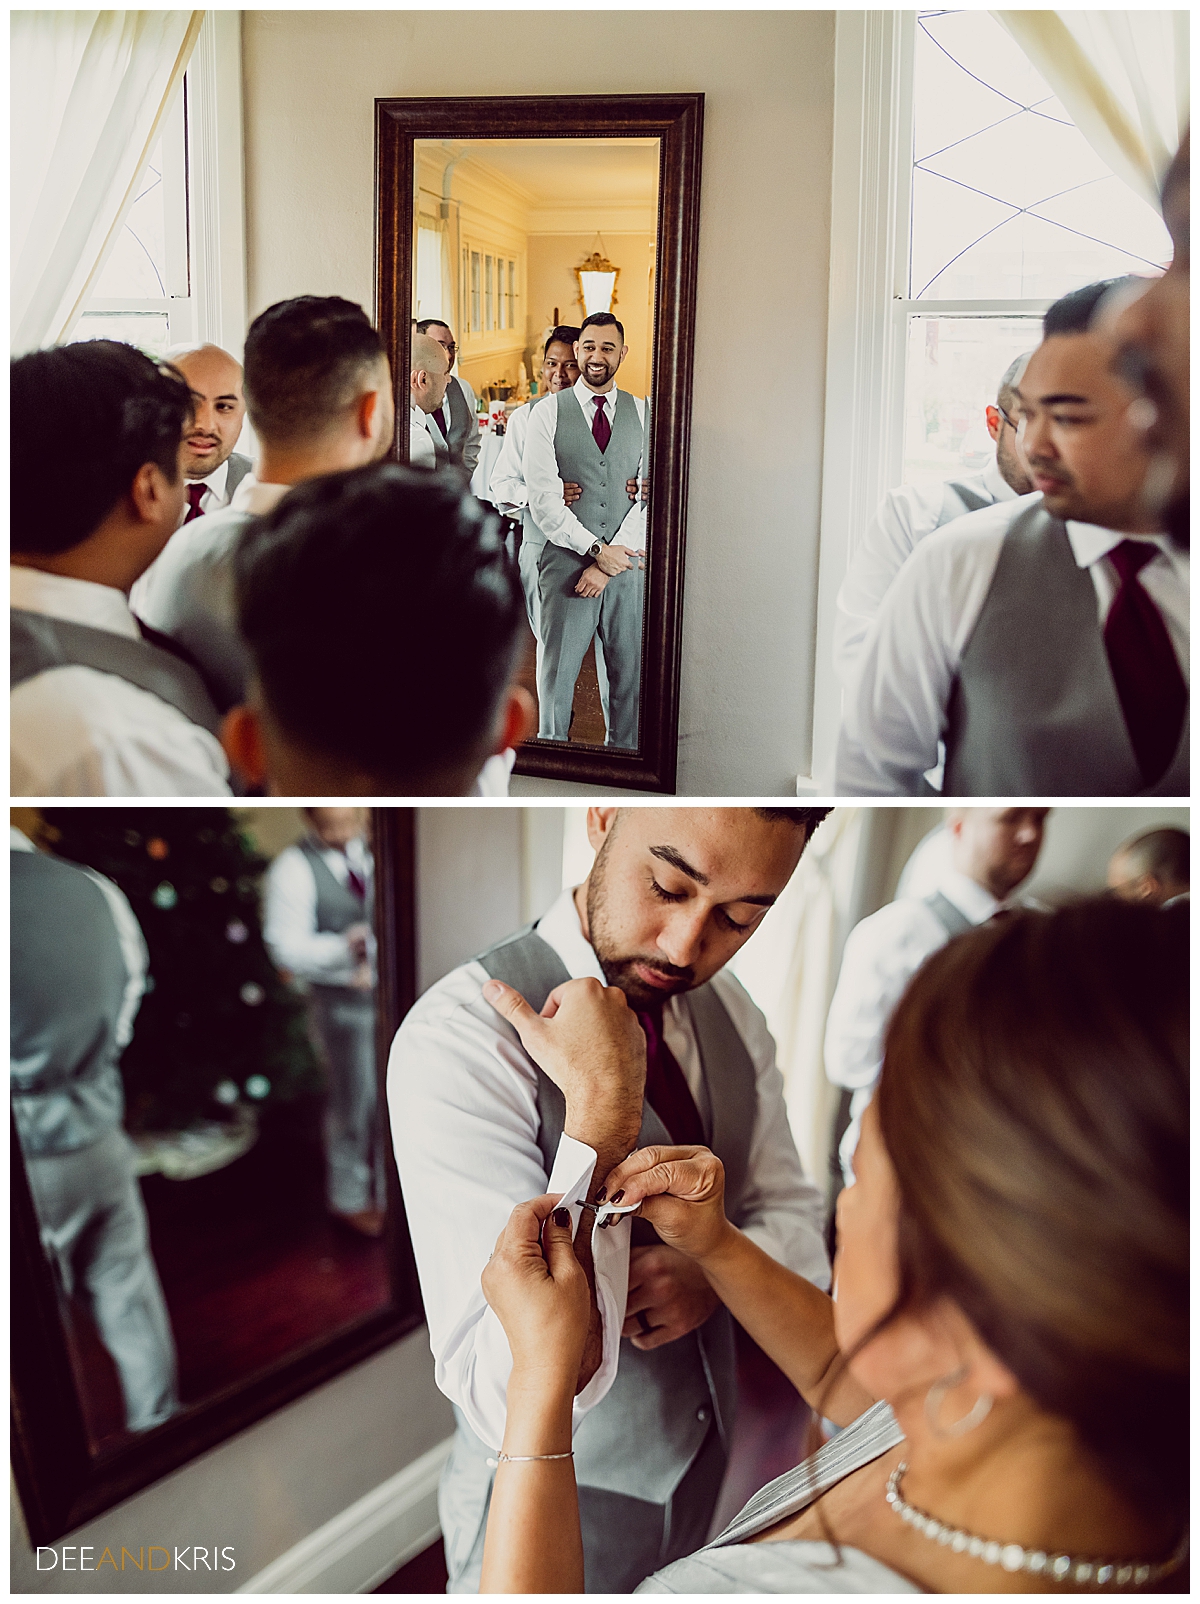 Two images: Top image of groom looking in mirror with groomsmen surrounding him. Bottom image of groom's mother helping with cufflinks.